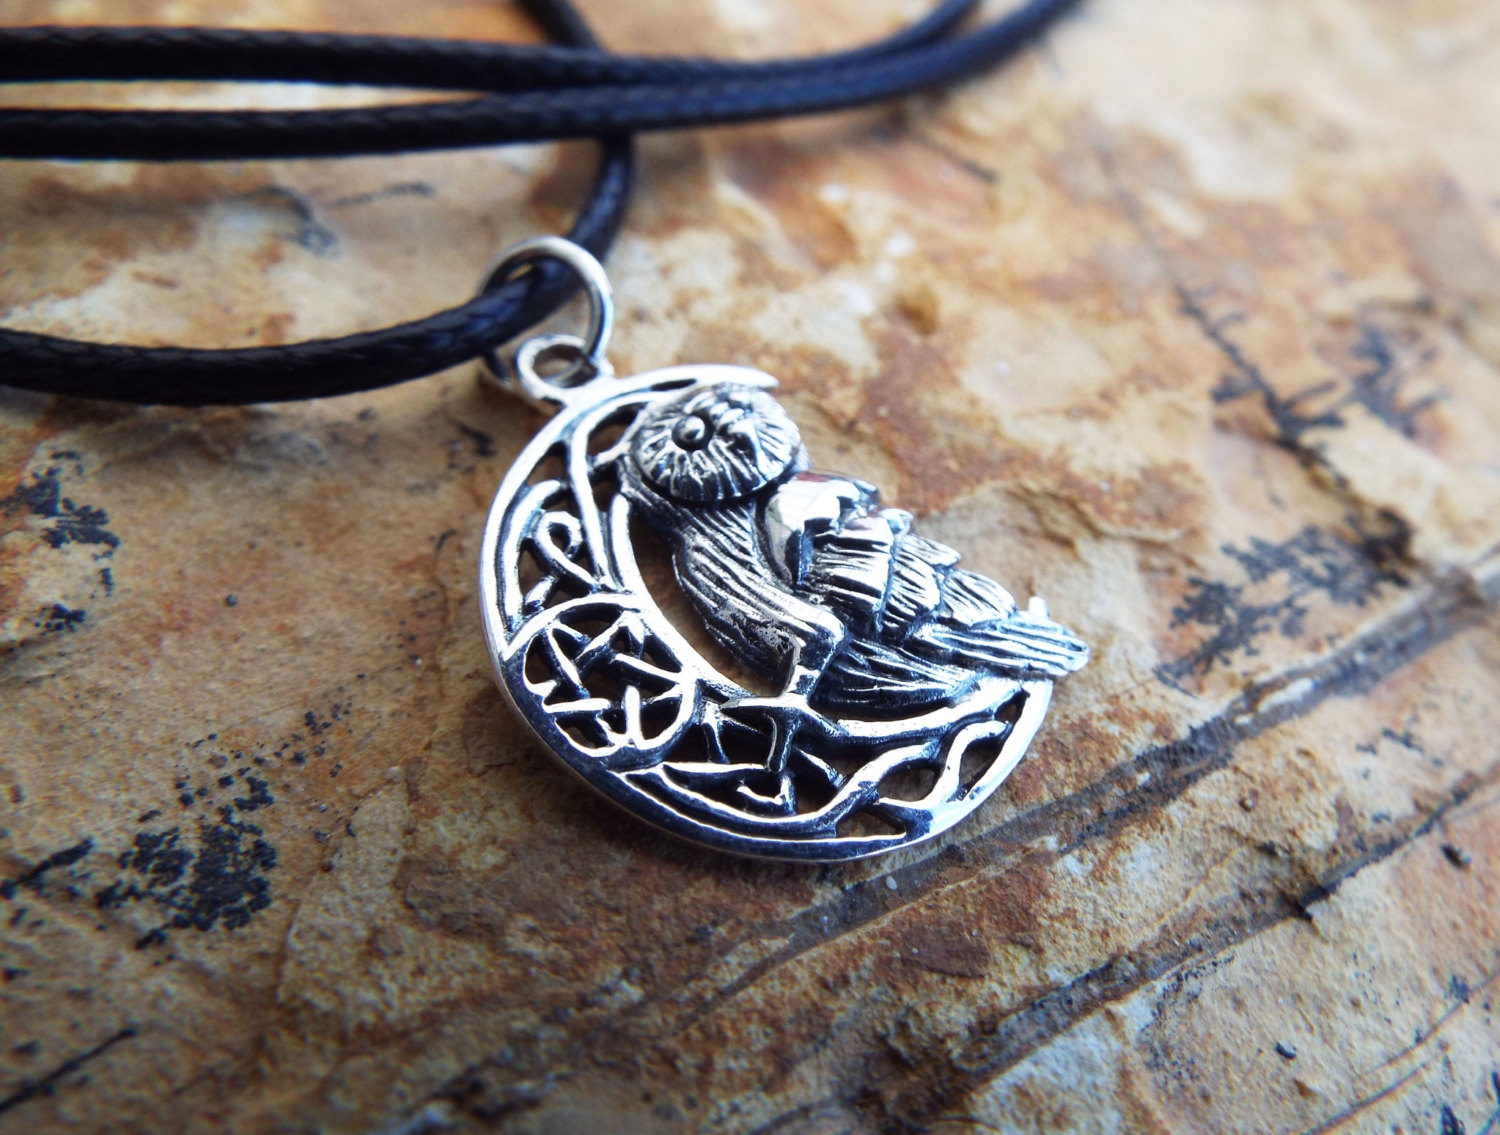 Handmade Silver Moon And Owl Necklace